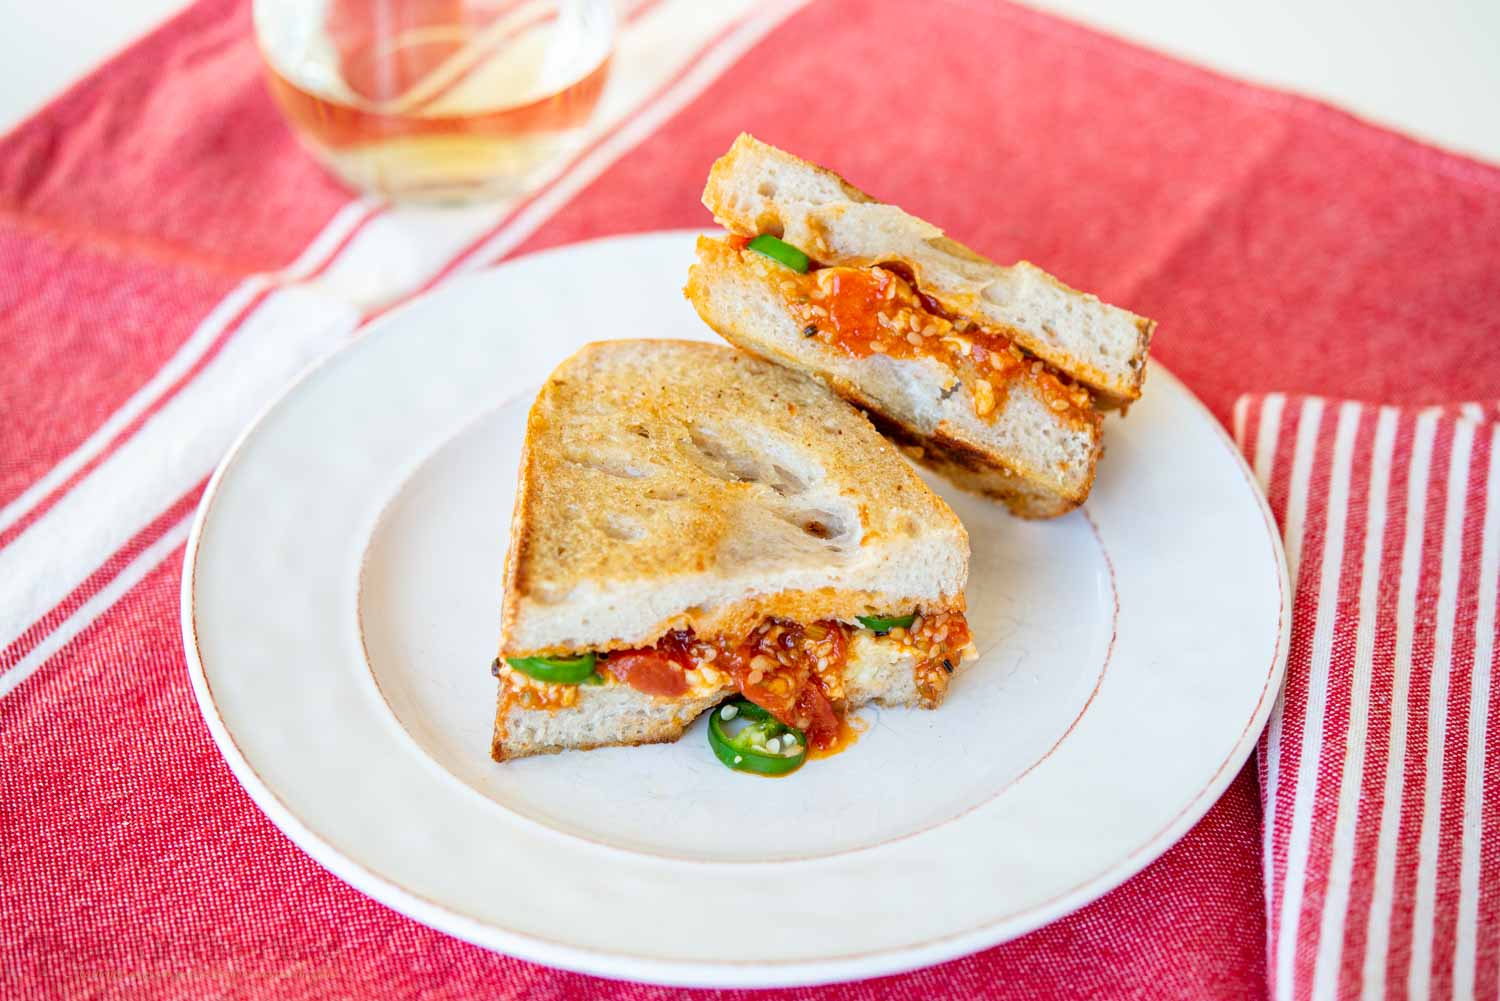 Grilled white cheddar sandwich with jalapenos and tomato chutney